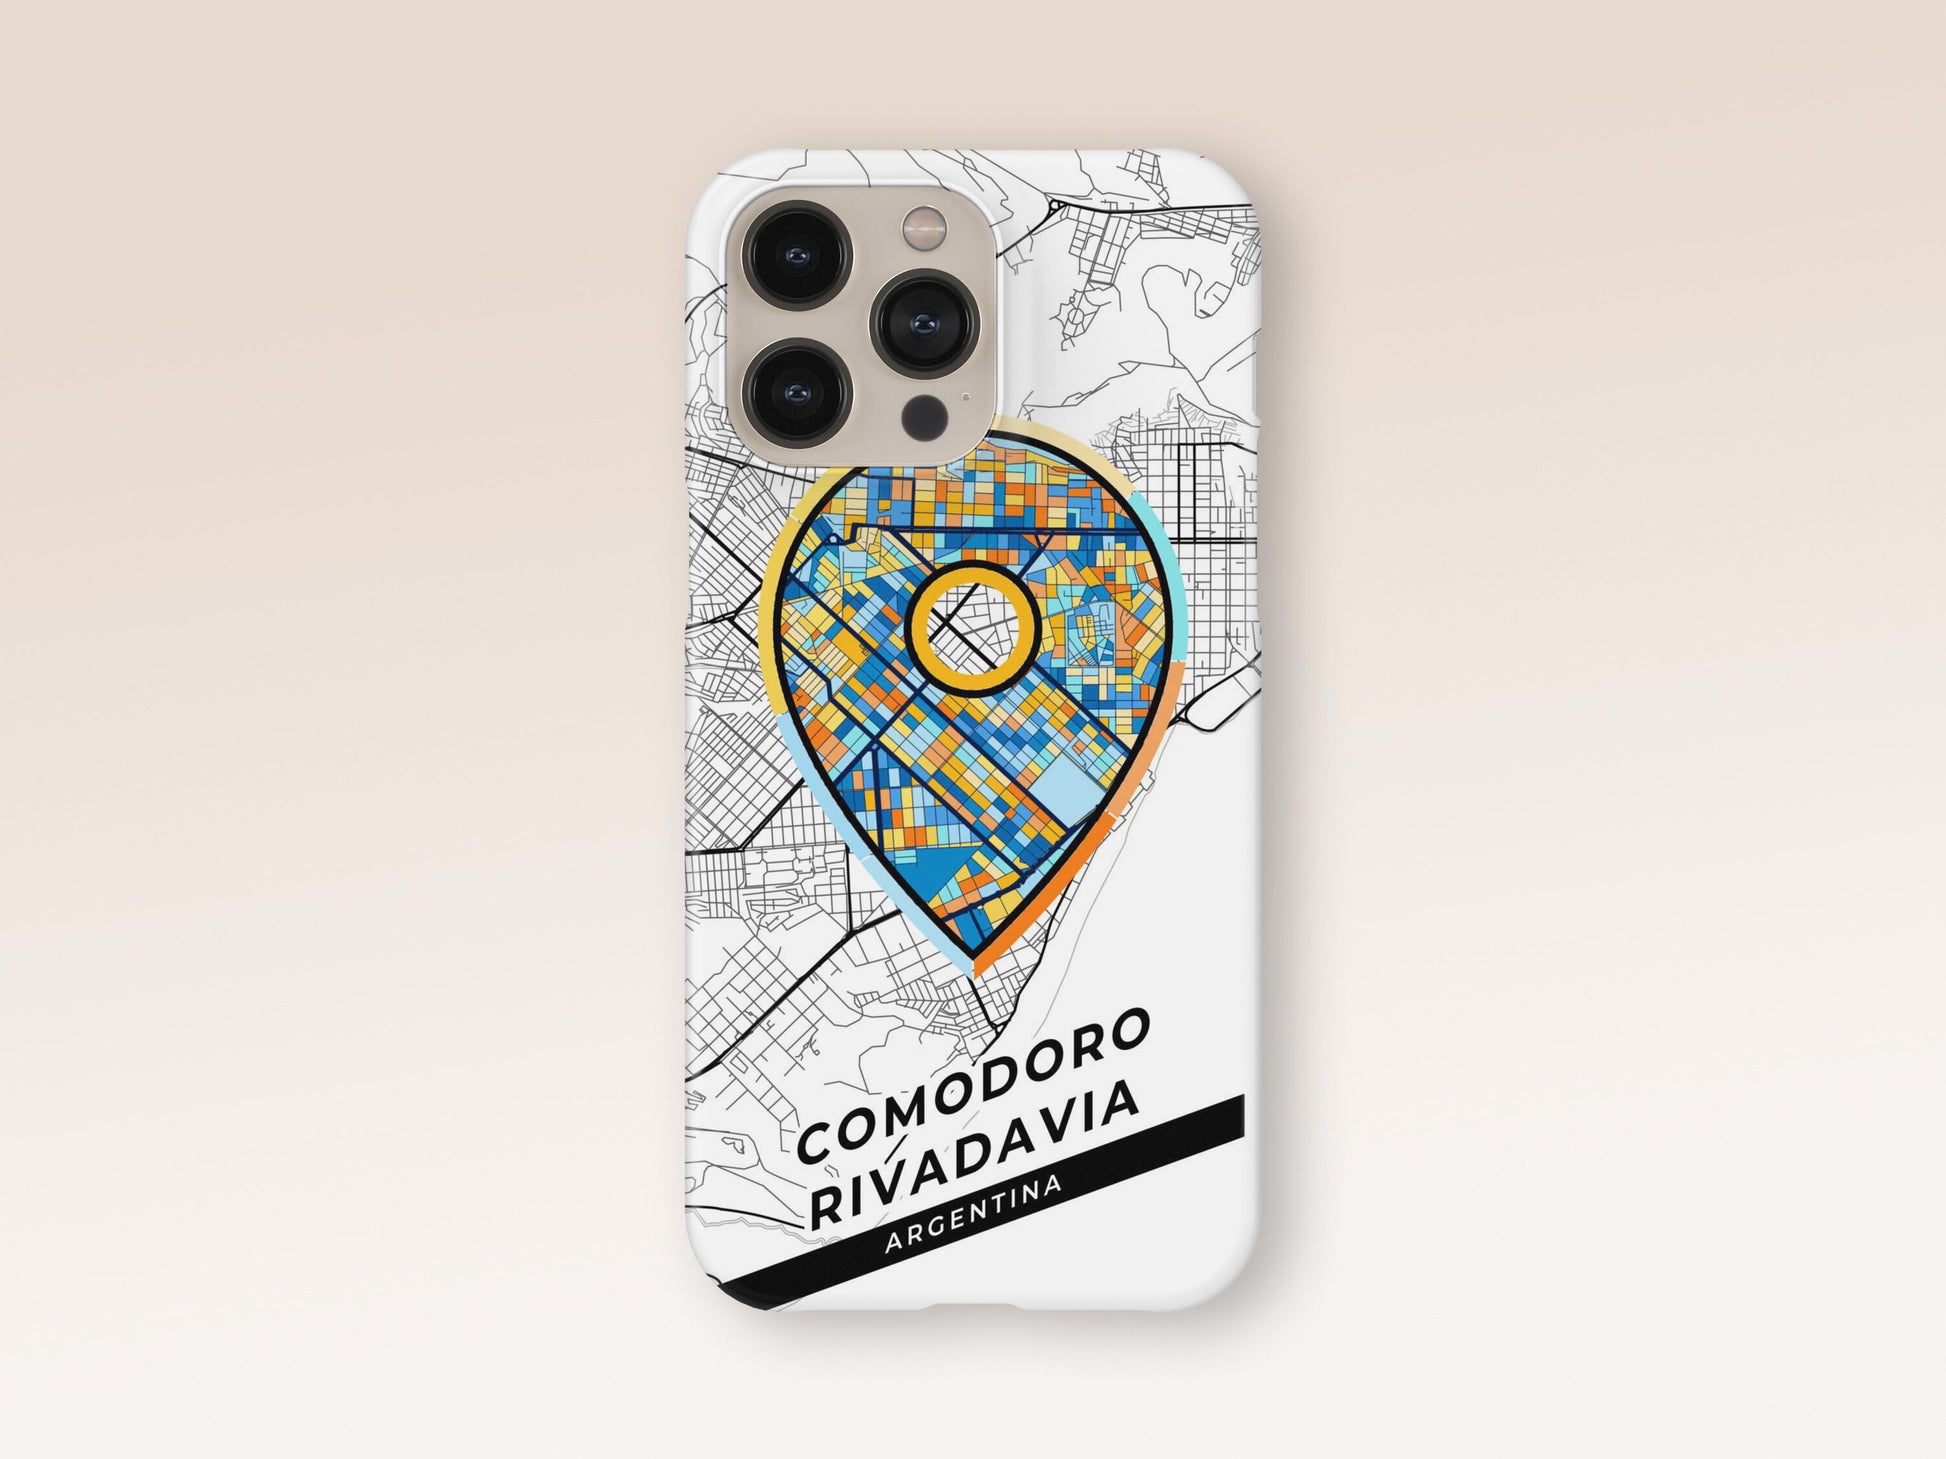 Comodoro Rivadavia Argentina slim phone case with colorful icon. Birthday, wedding or housewarming gift. Couple match cases. 1